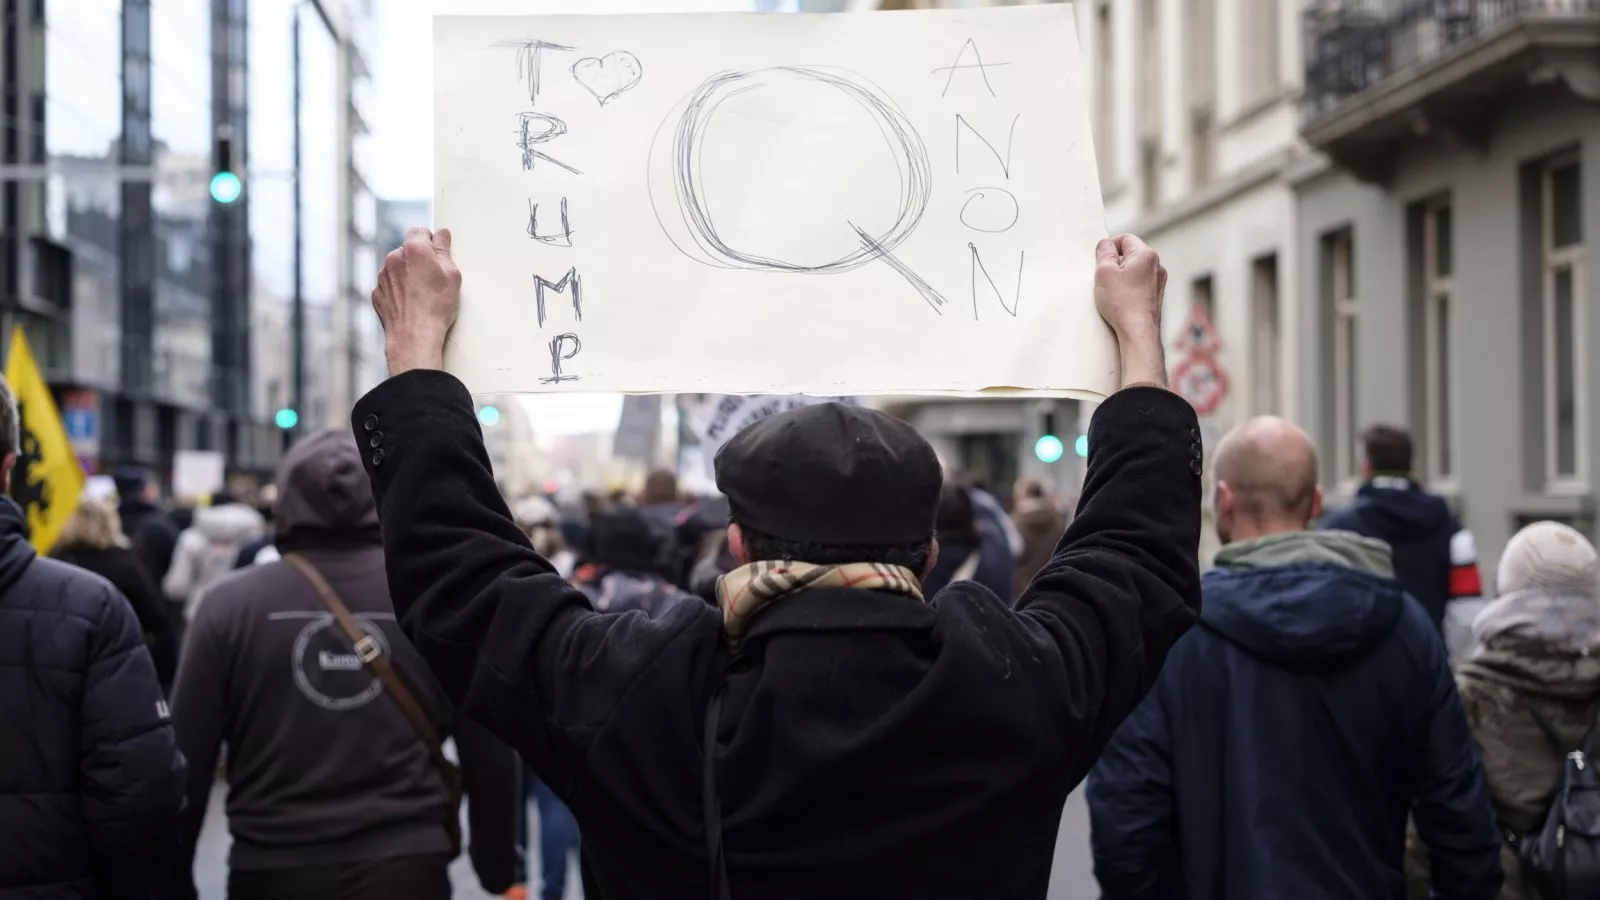 QAnon founder returns after Roe v. Wade ruling: “remember your oath”